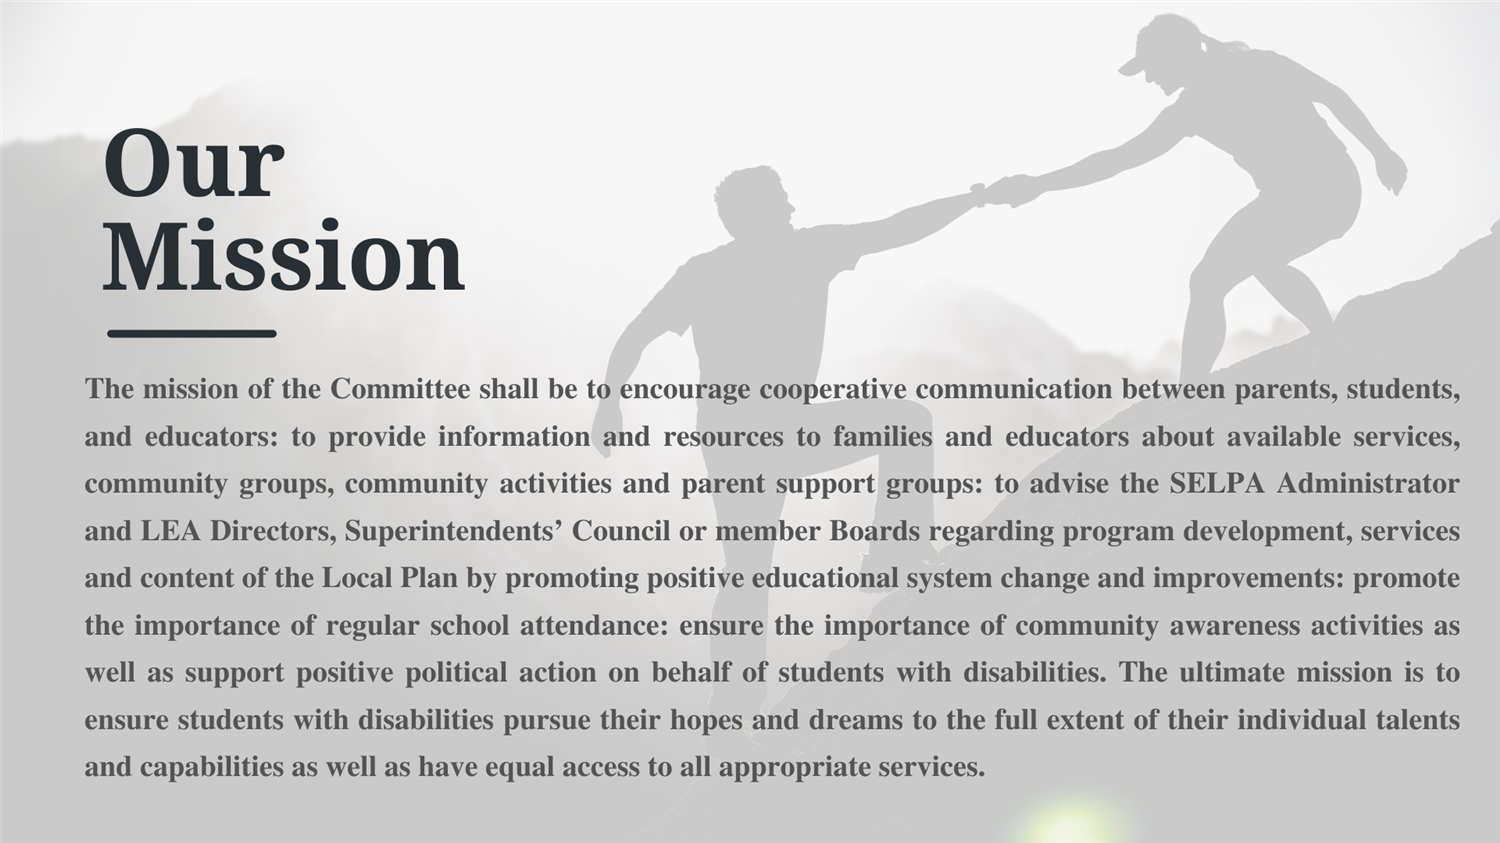 Our Mission Statement for Community Advisory Committee